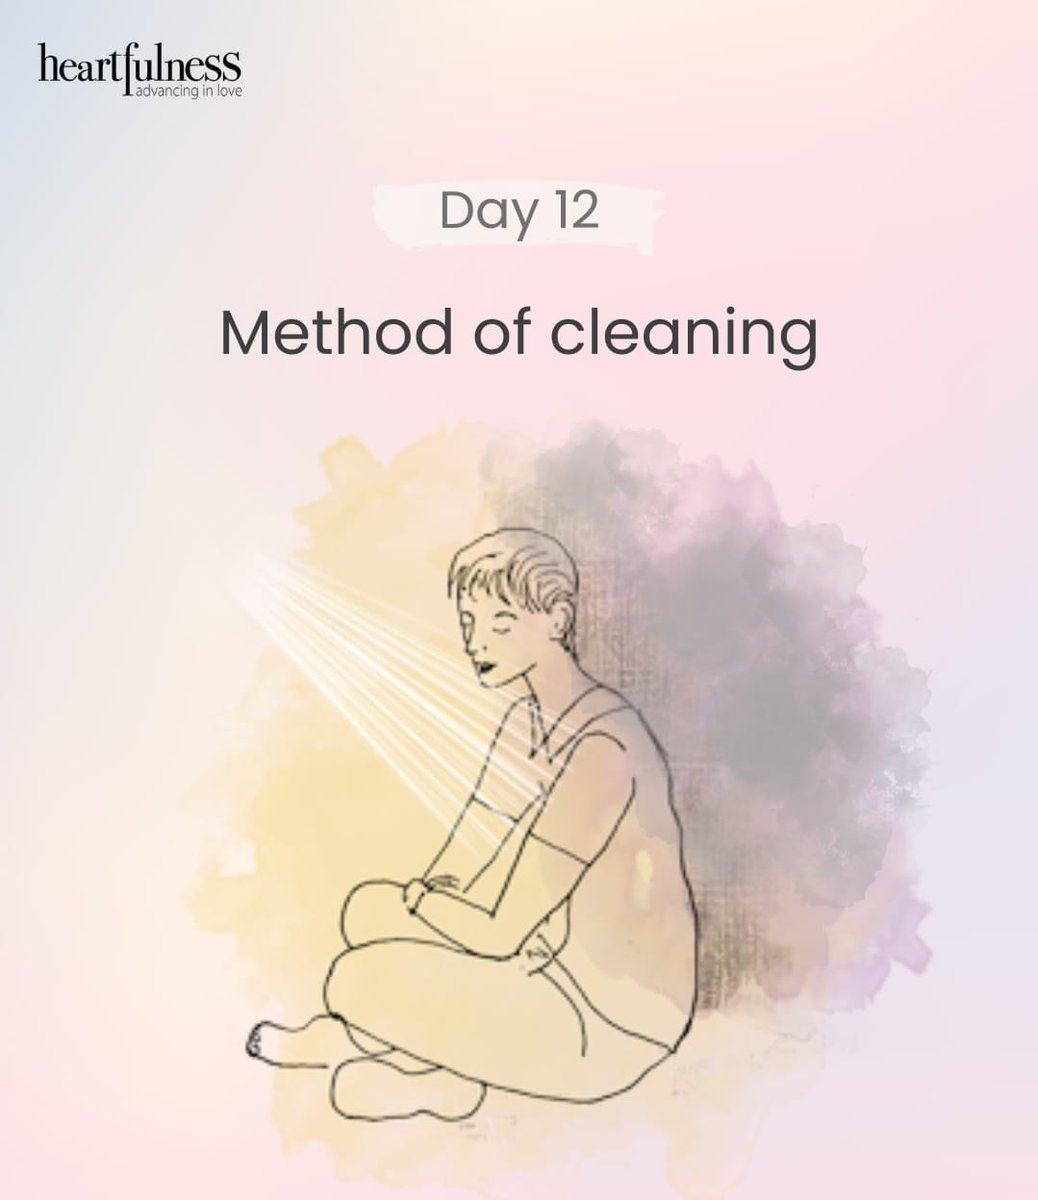 Day 12 of 21 . Learn how Daily cleaning helps your spiritual growth